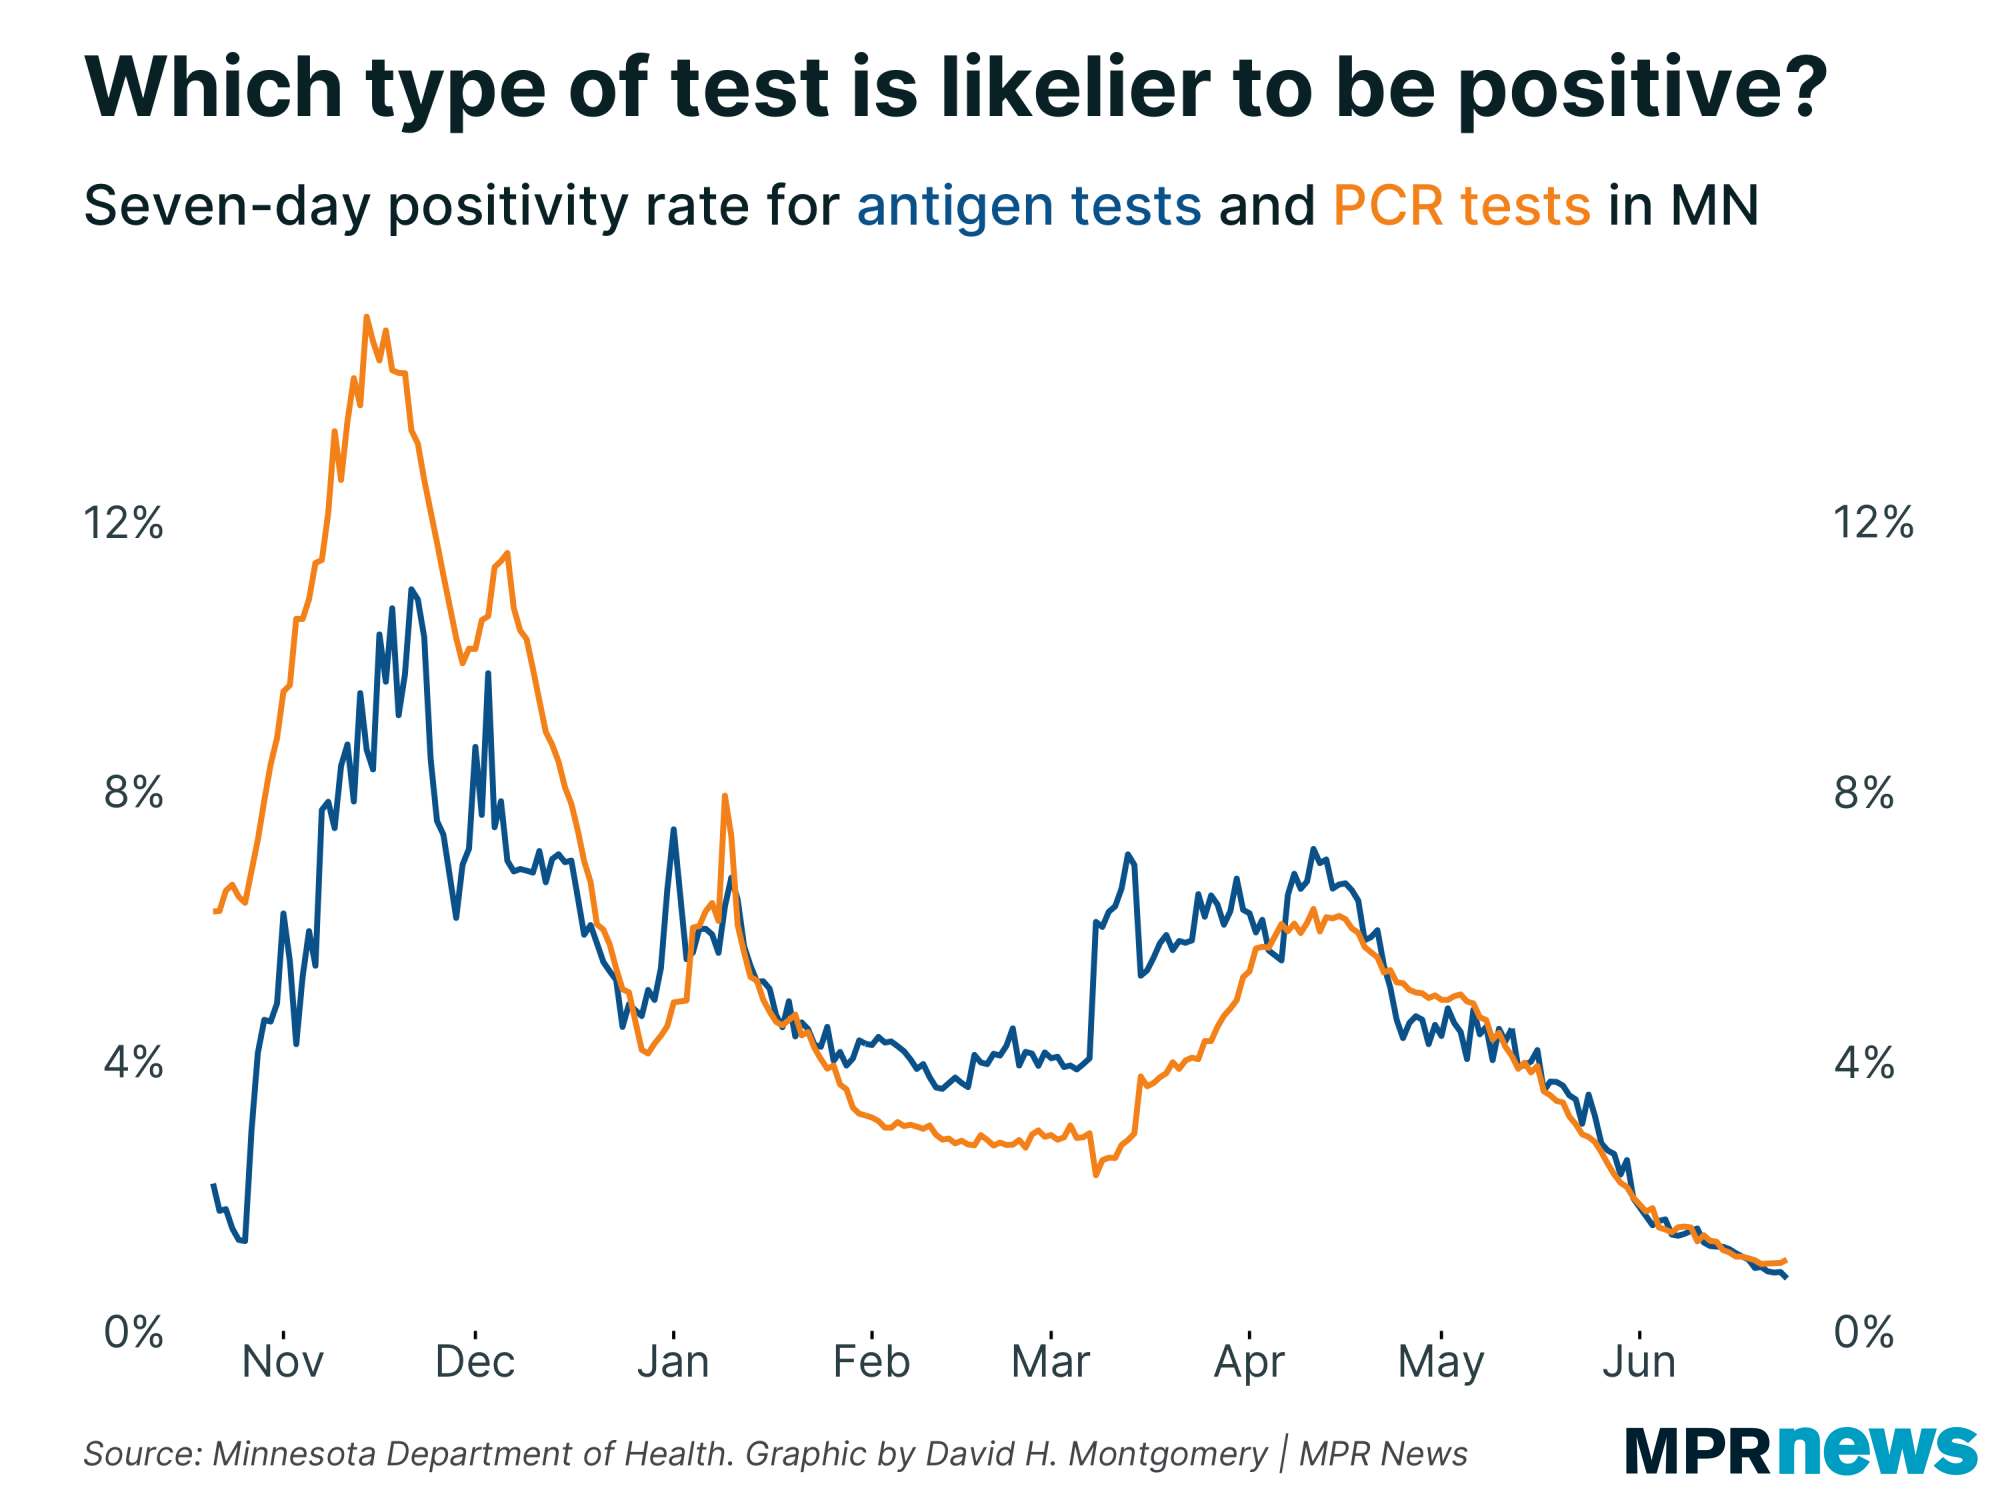 Graph of the positivity rates for PCR and antigen tests in Minnesota